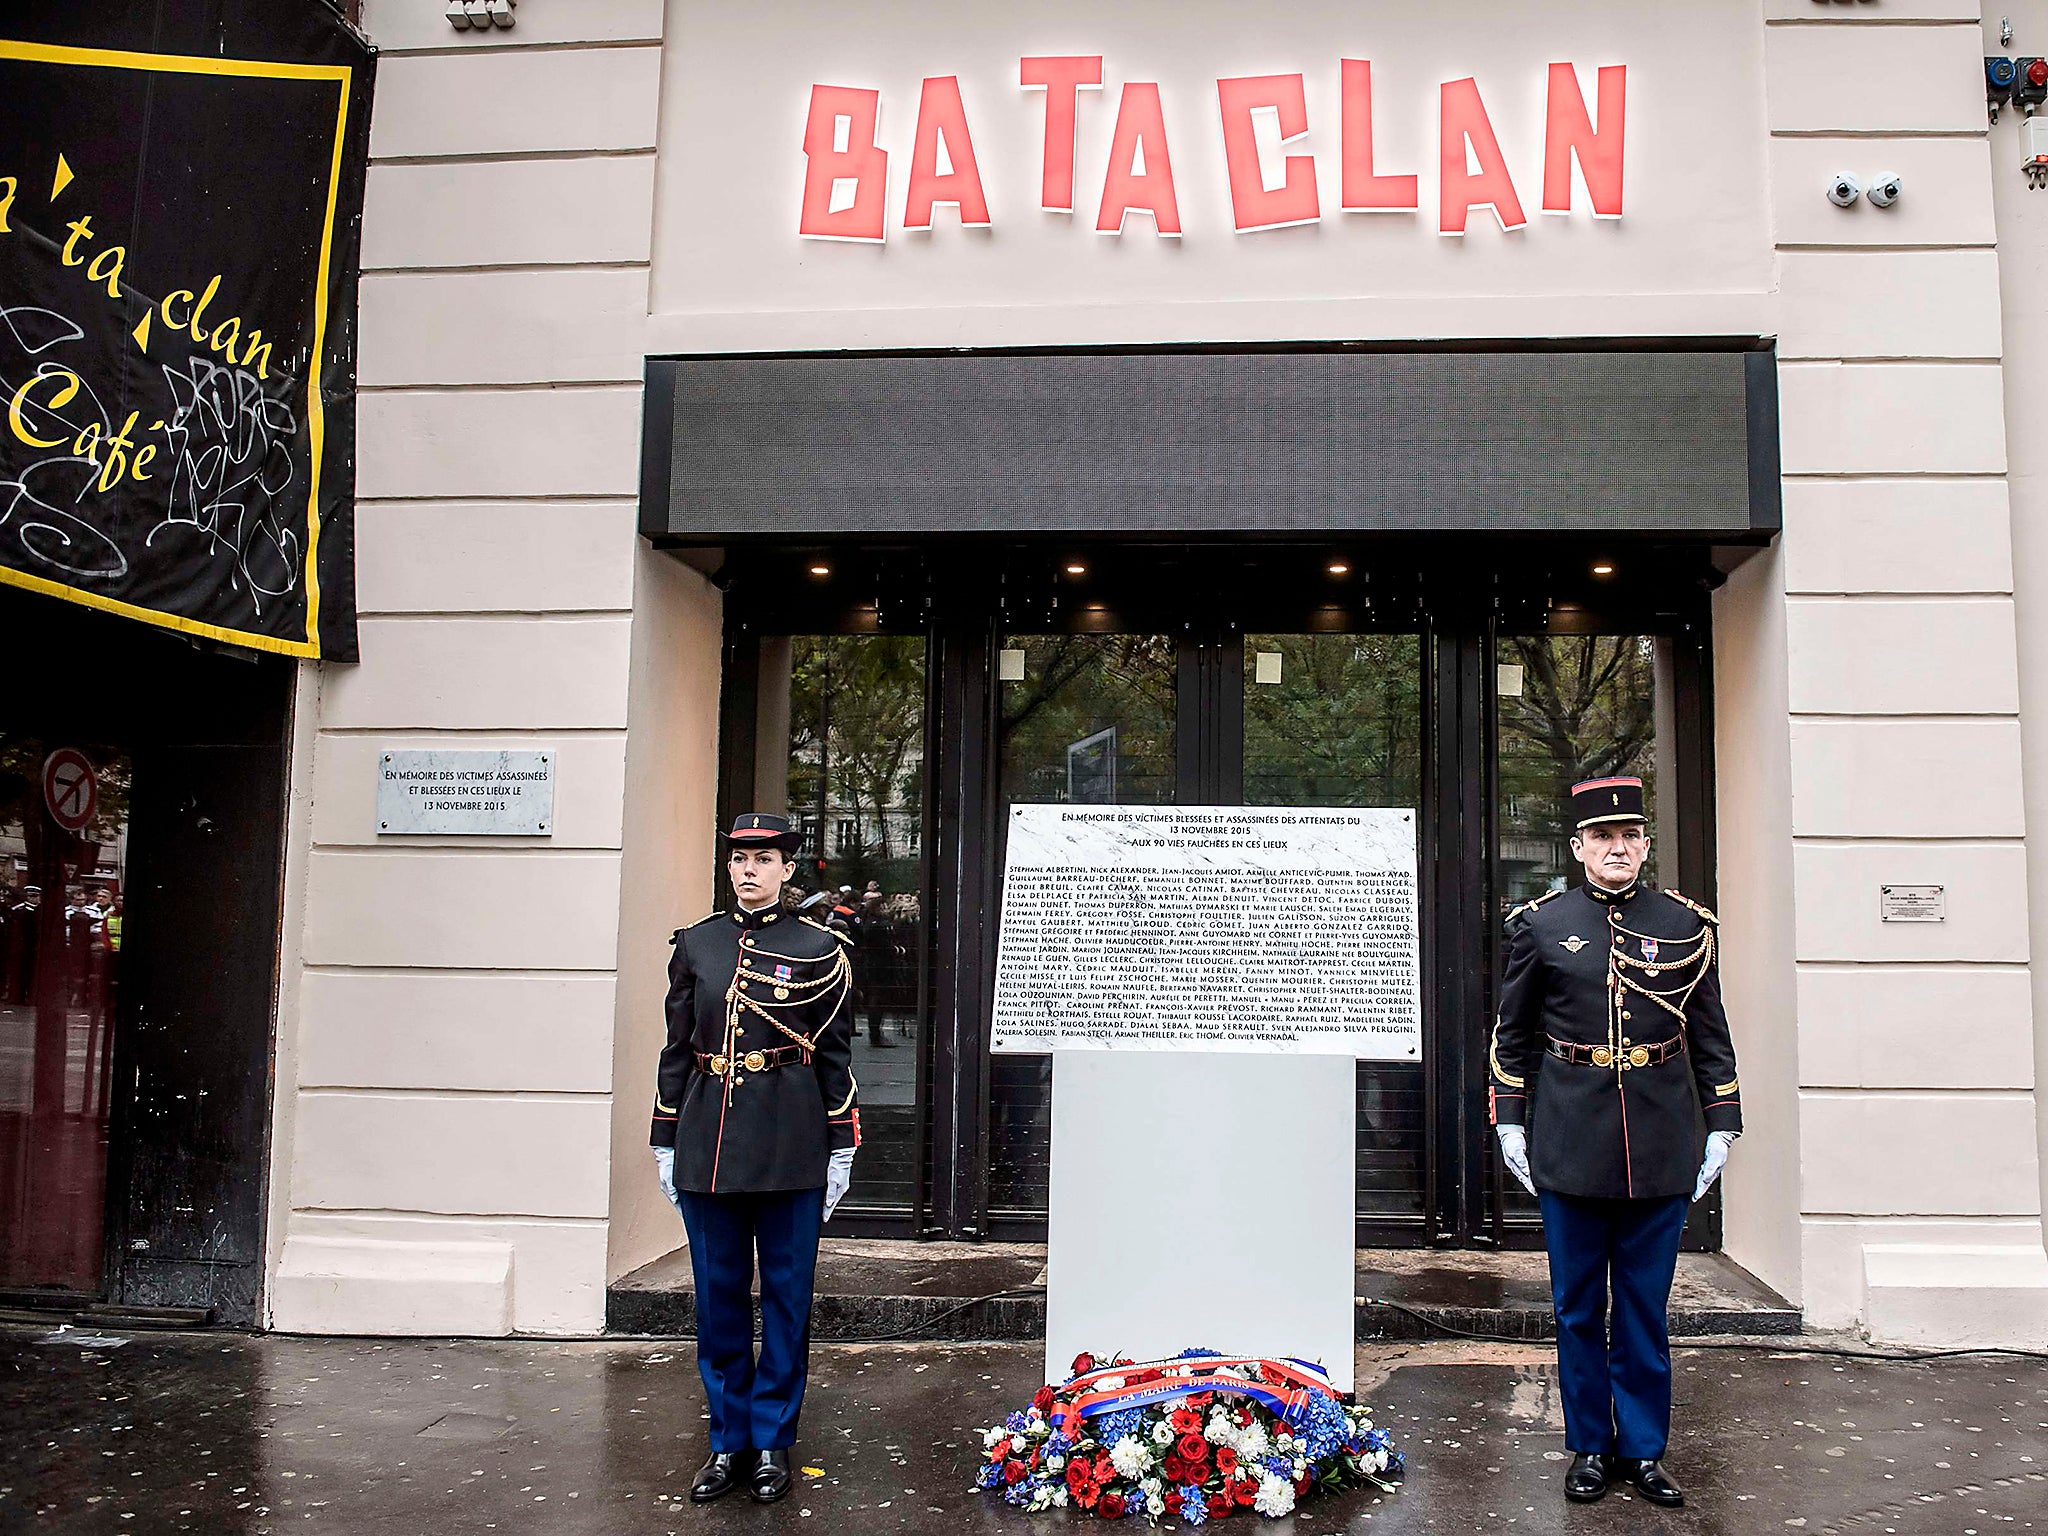 A plaque outside the reopened Bataclan theatre yesterday, on the first anniversary of the murder of 89 concert goers there